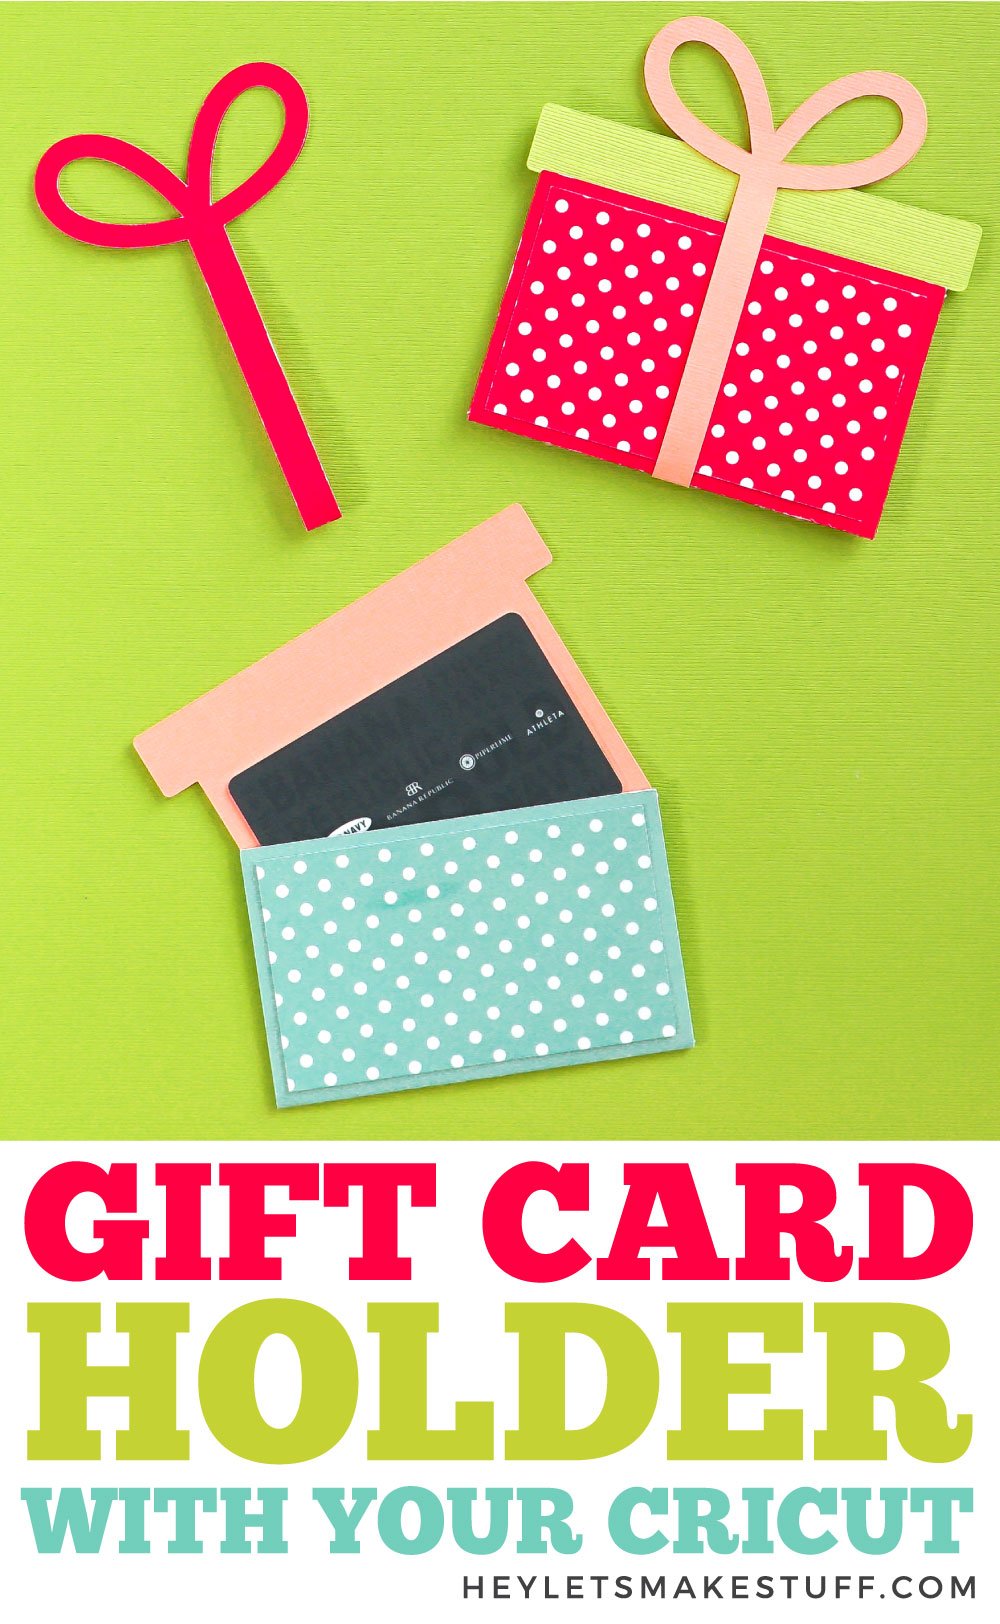 diy-gift-card-holder-with-the-cricut-hey-let-s-make-stuff